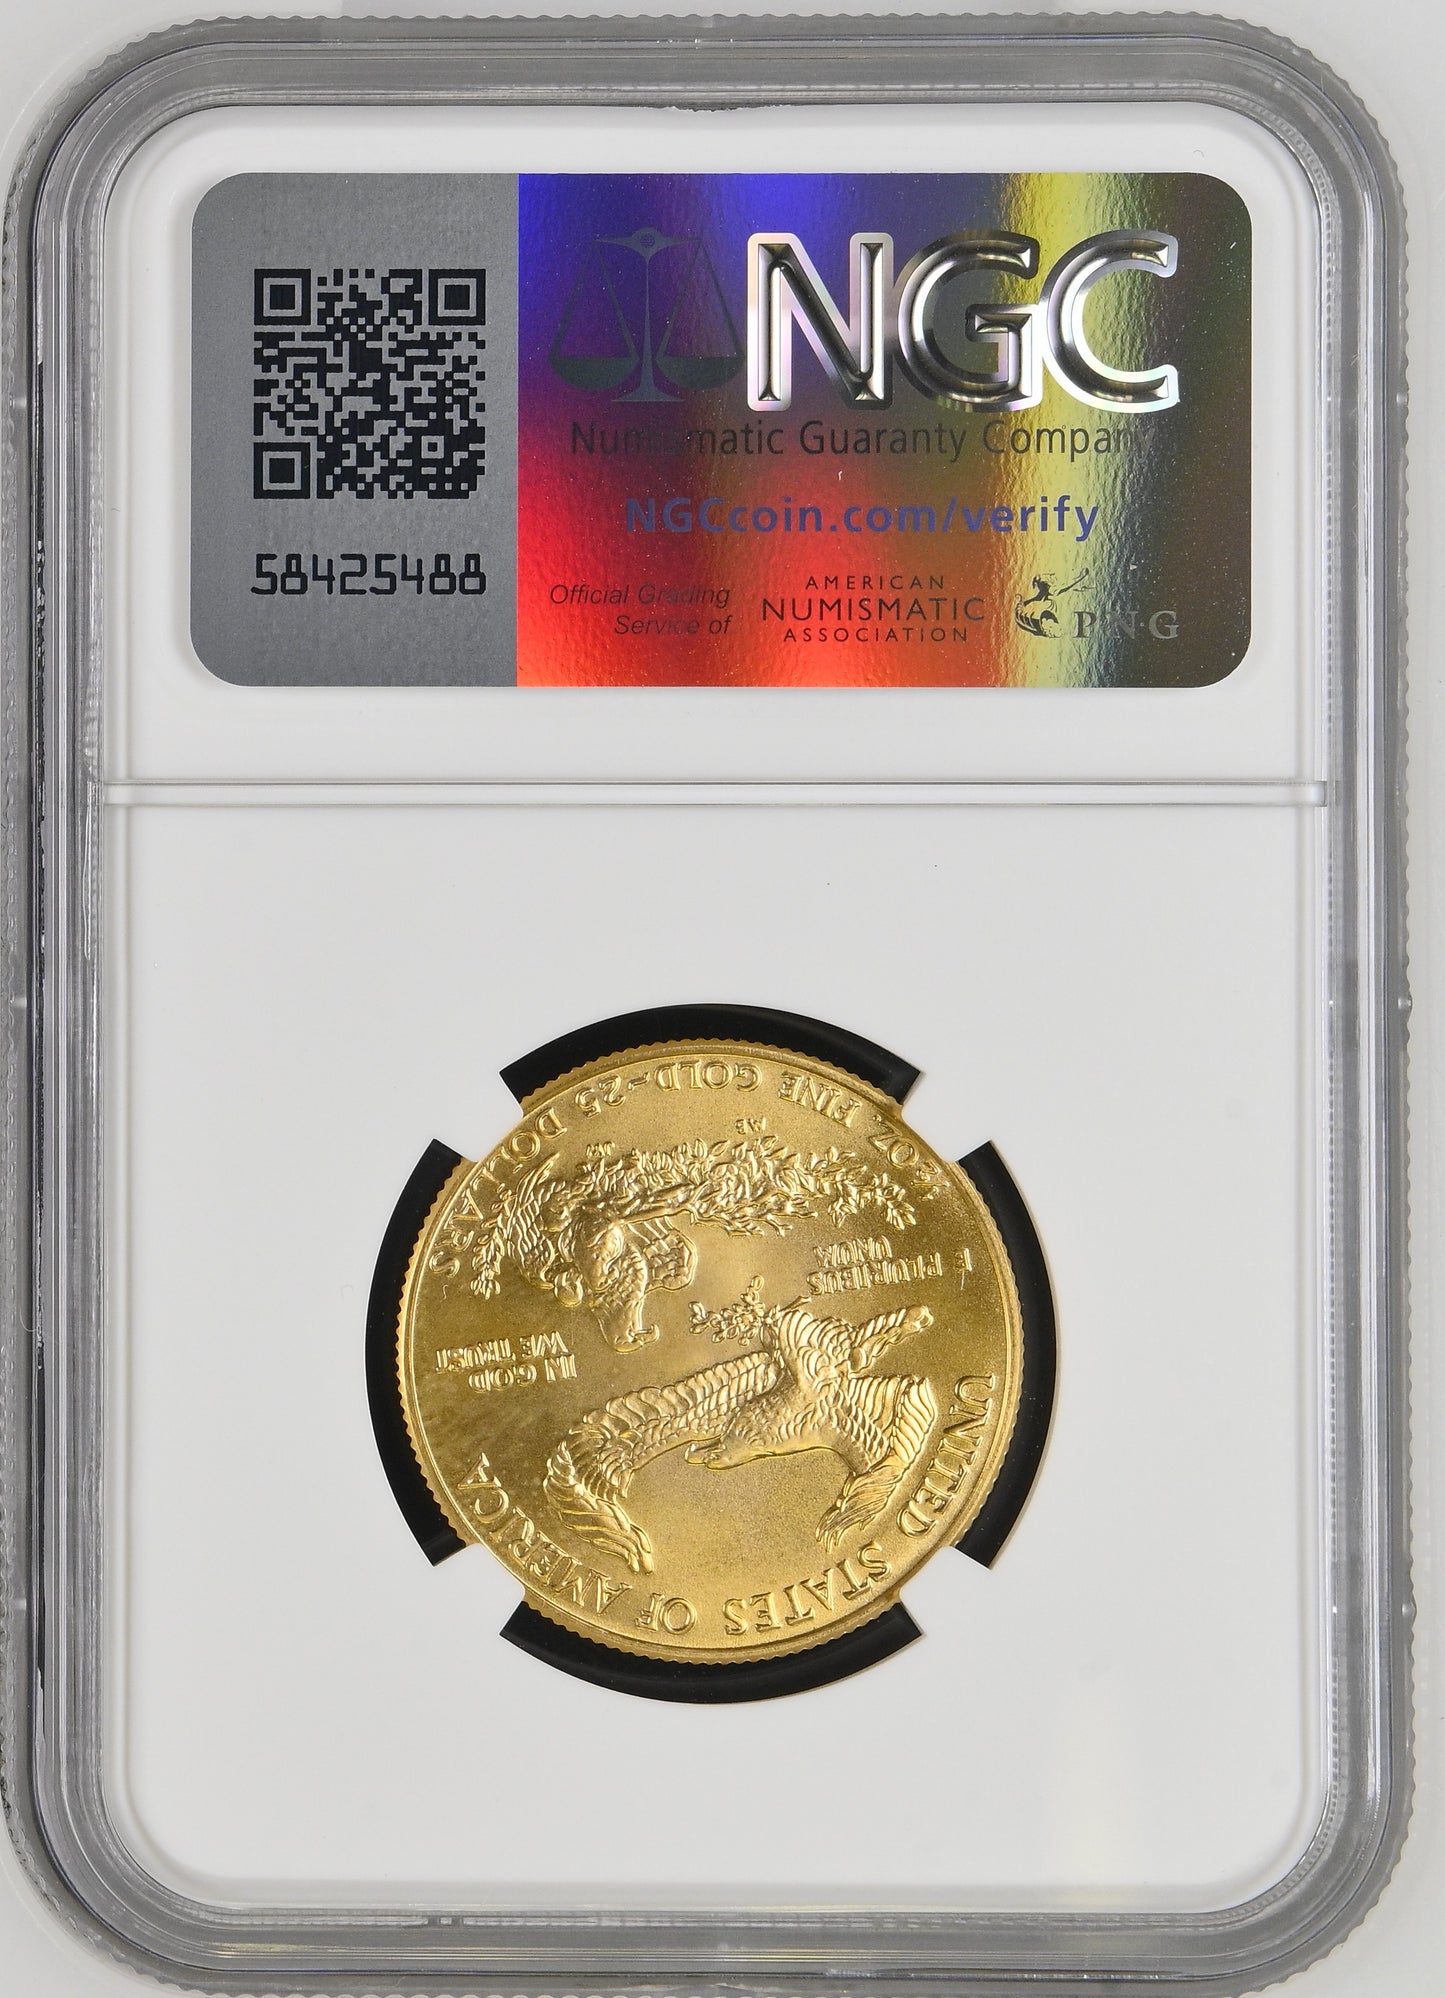 1986 1/2 oz Gold American Eagle 25$ Bullion Gold Coin - NGC MS 69